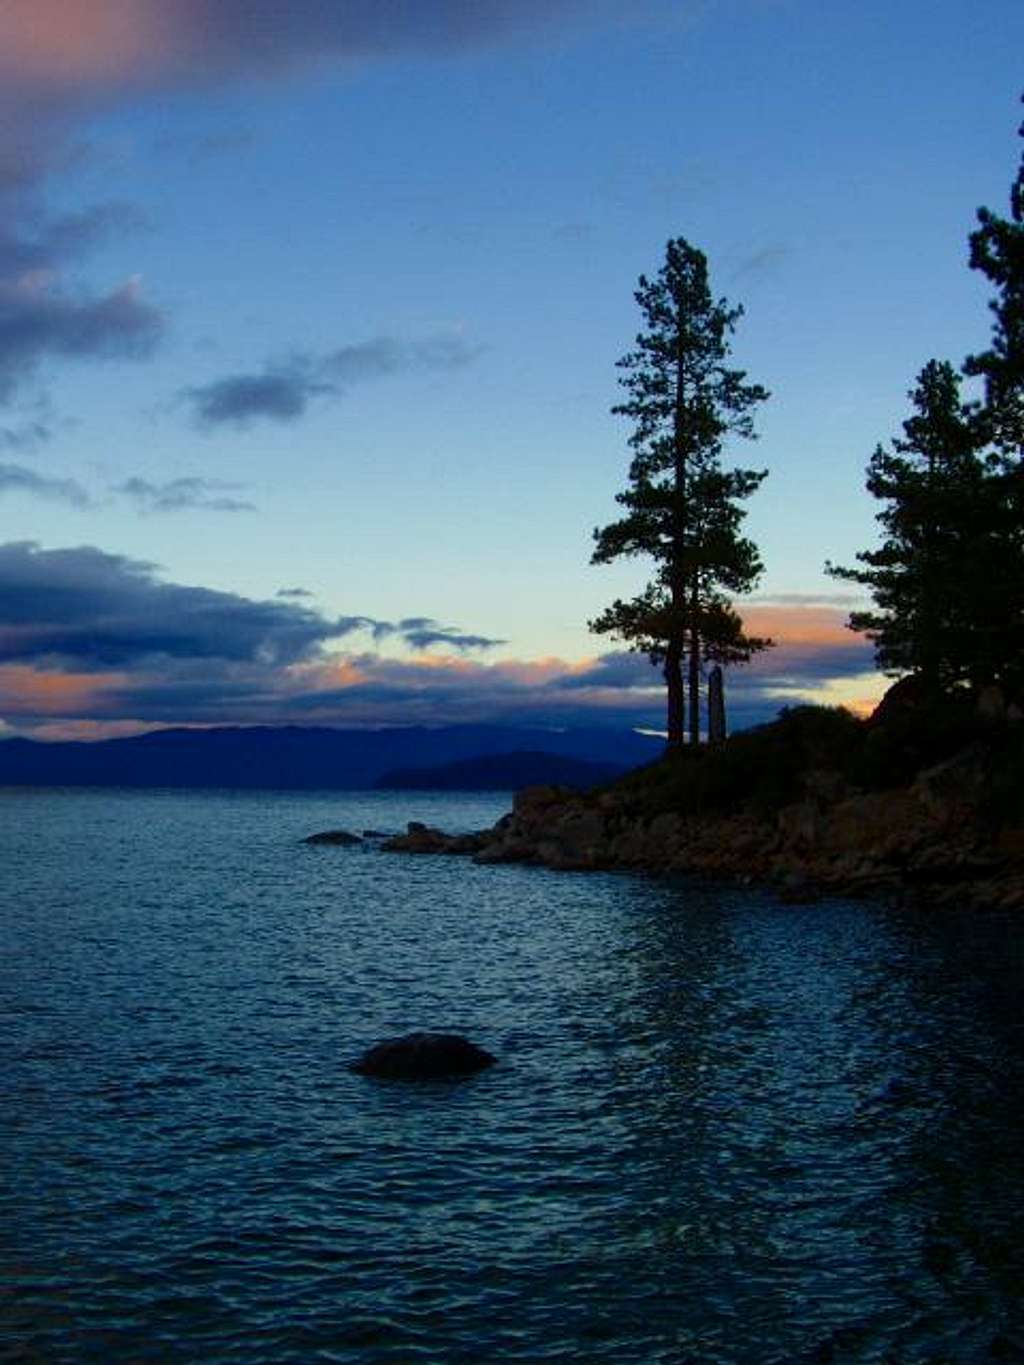 Peaceful evening at Tahoe